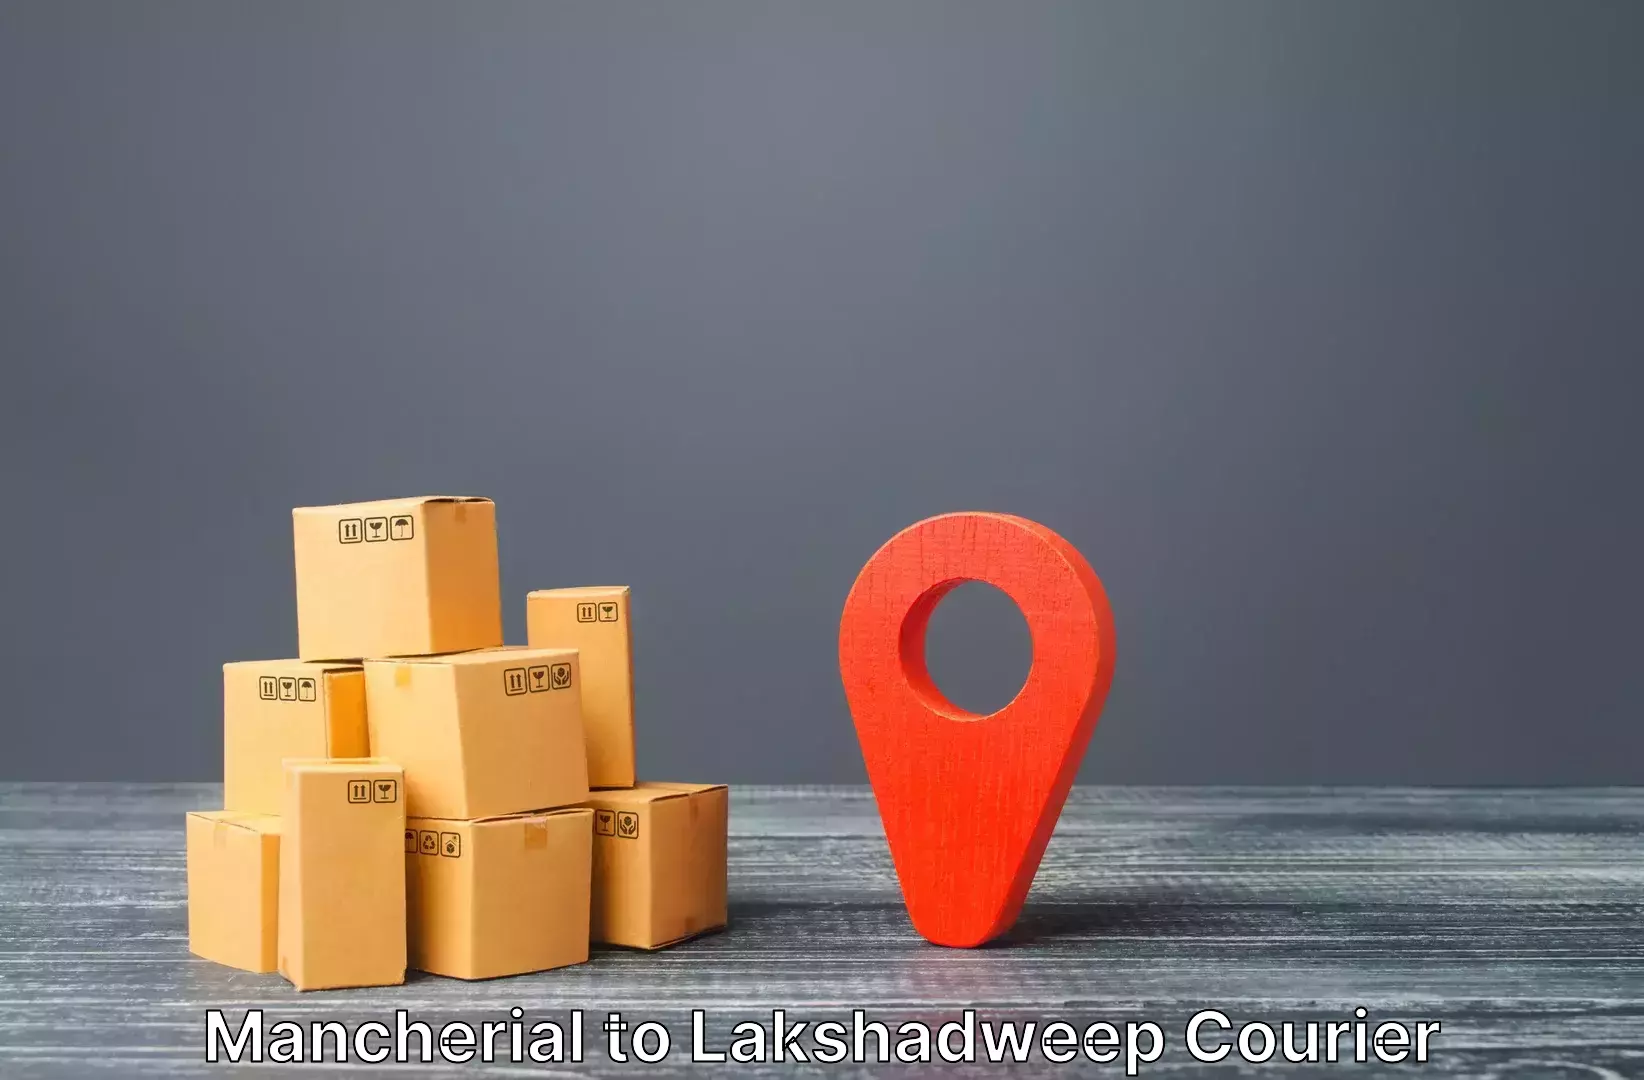 Luggage shipment specialists Mancherial to Lakshadweep